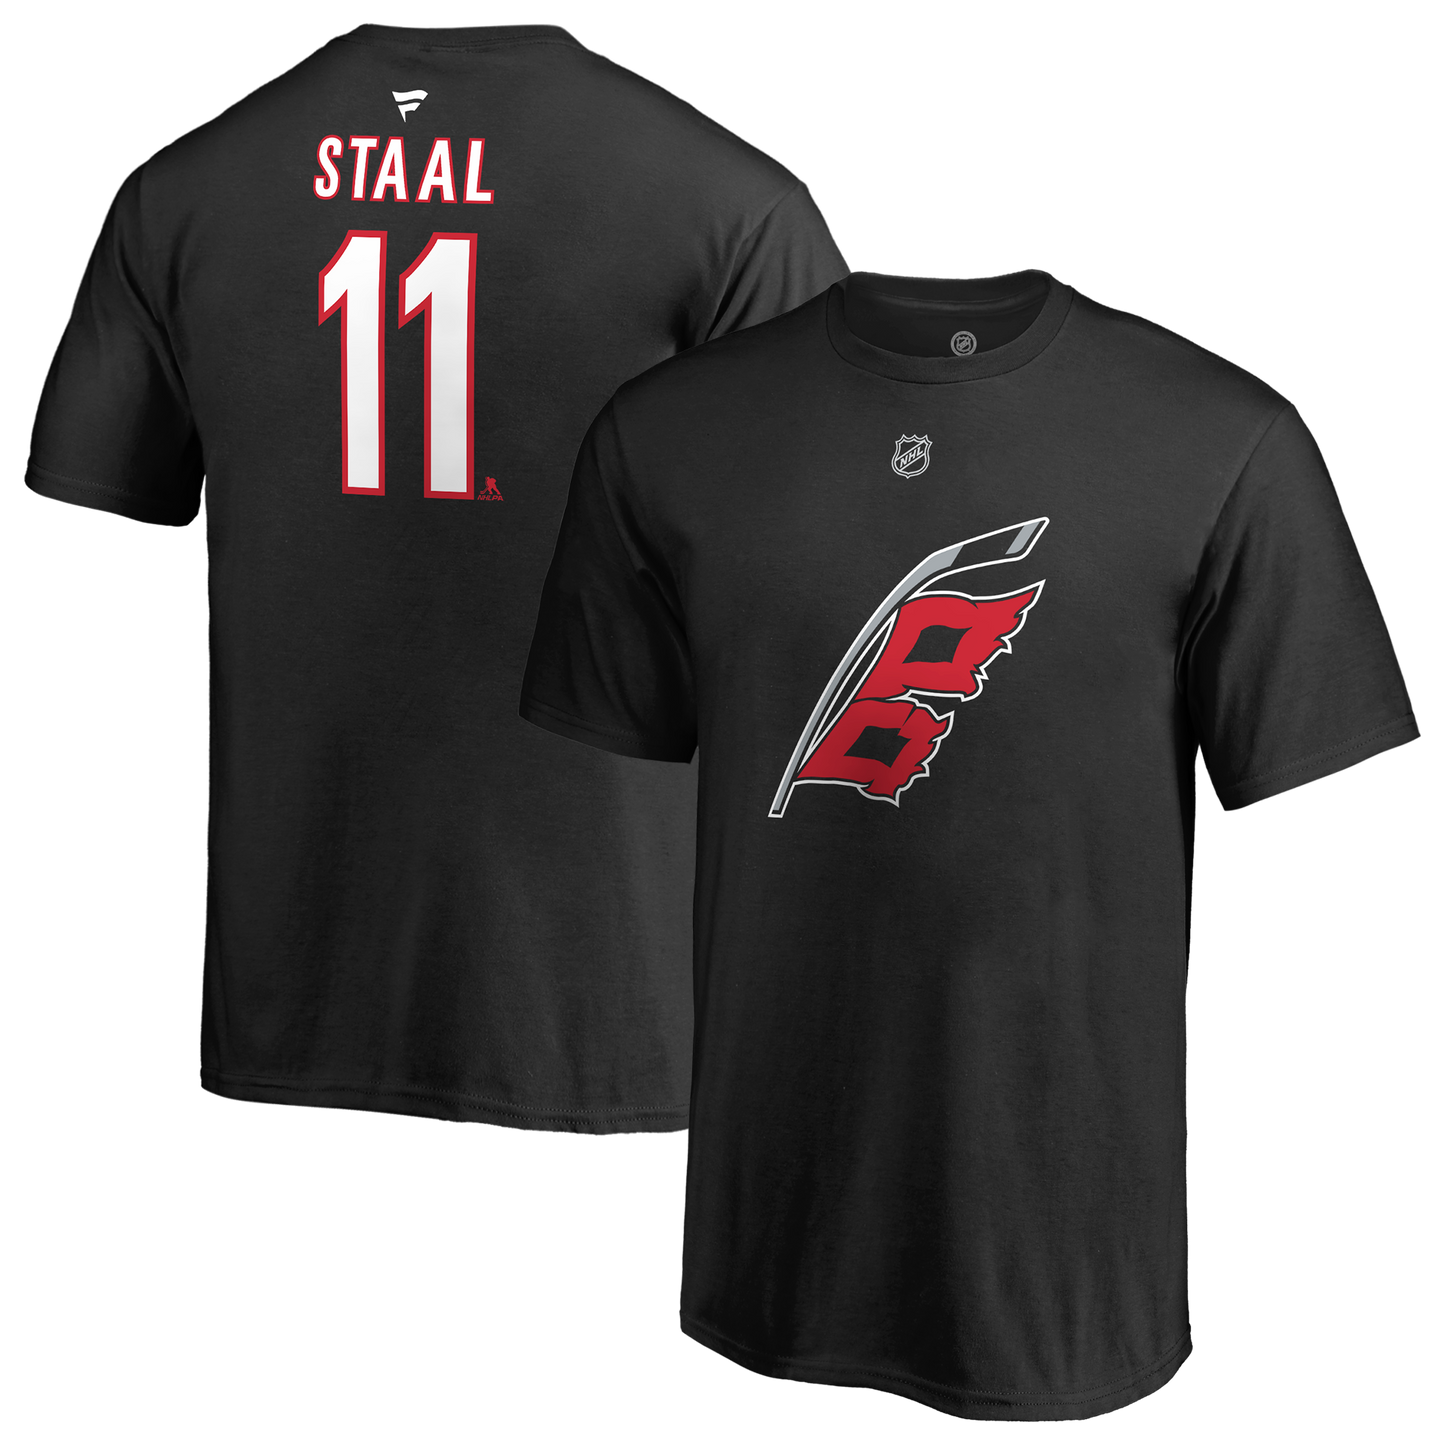 Black tee with Hurricanes flag logo on front, Staal #11 and Fanatics logo on back